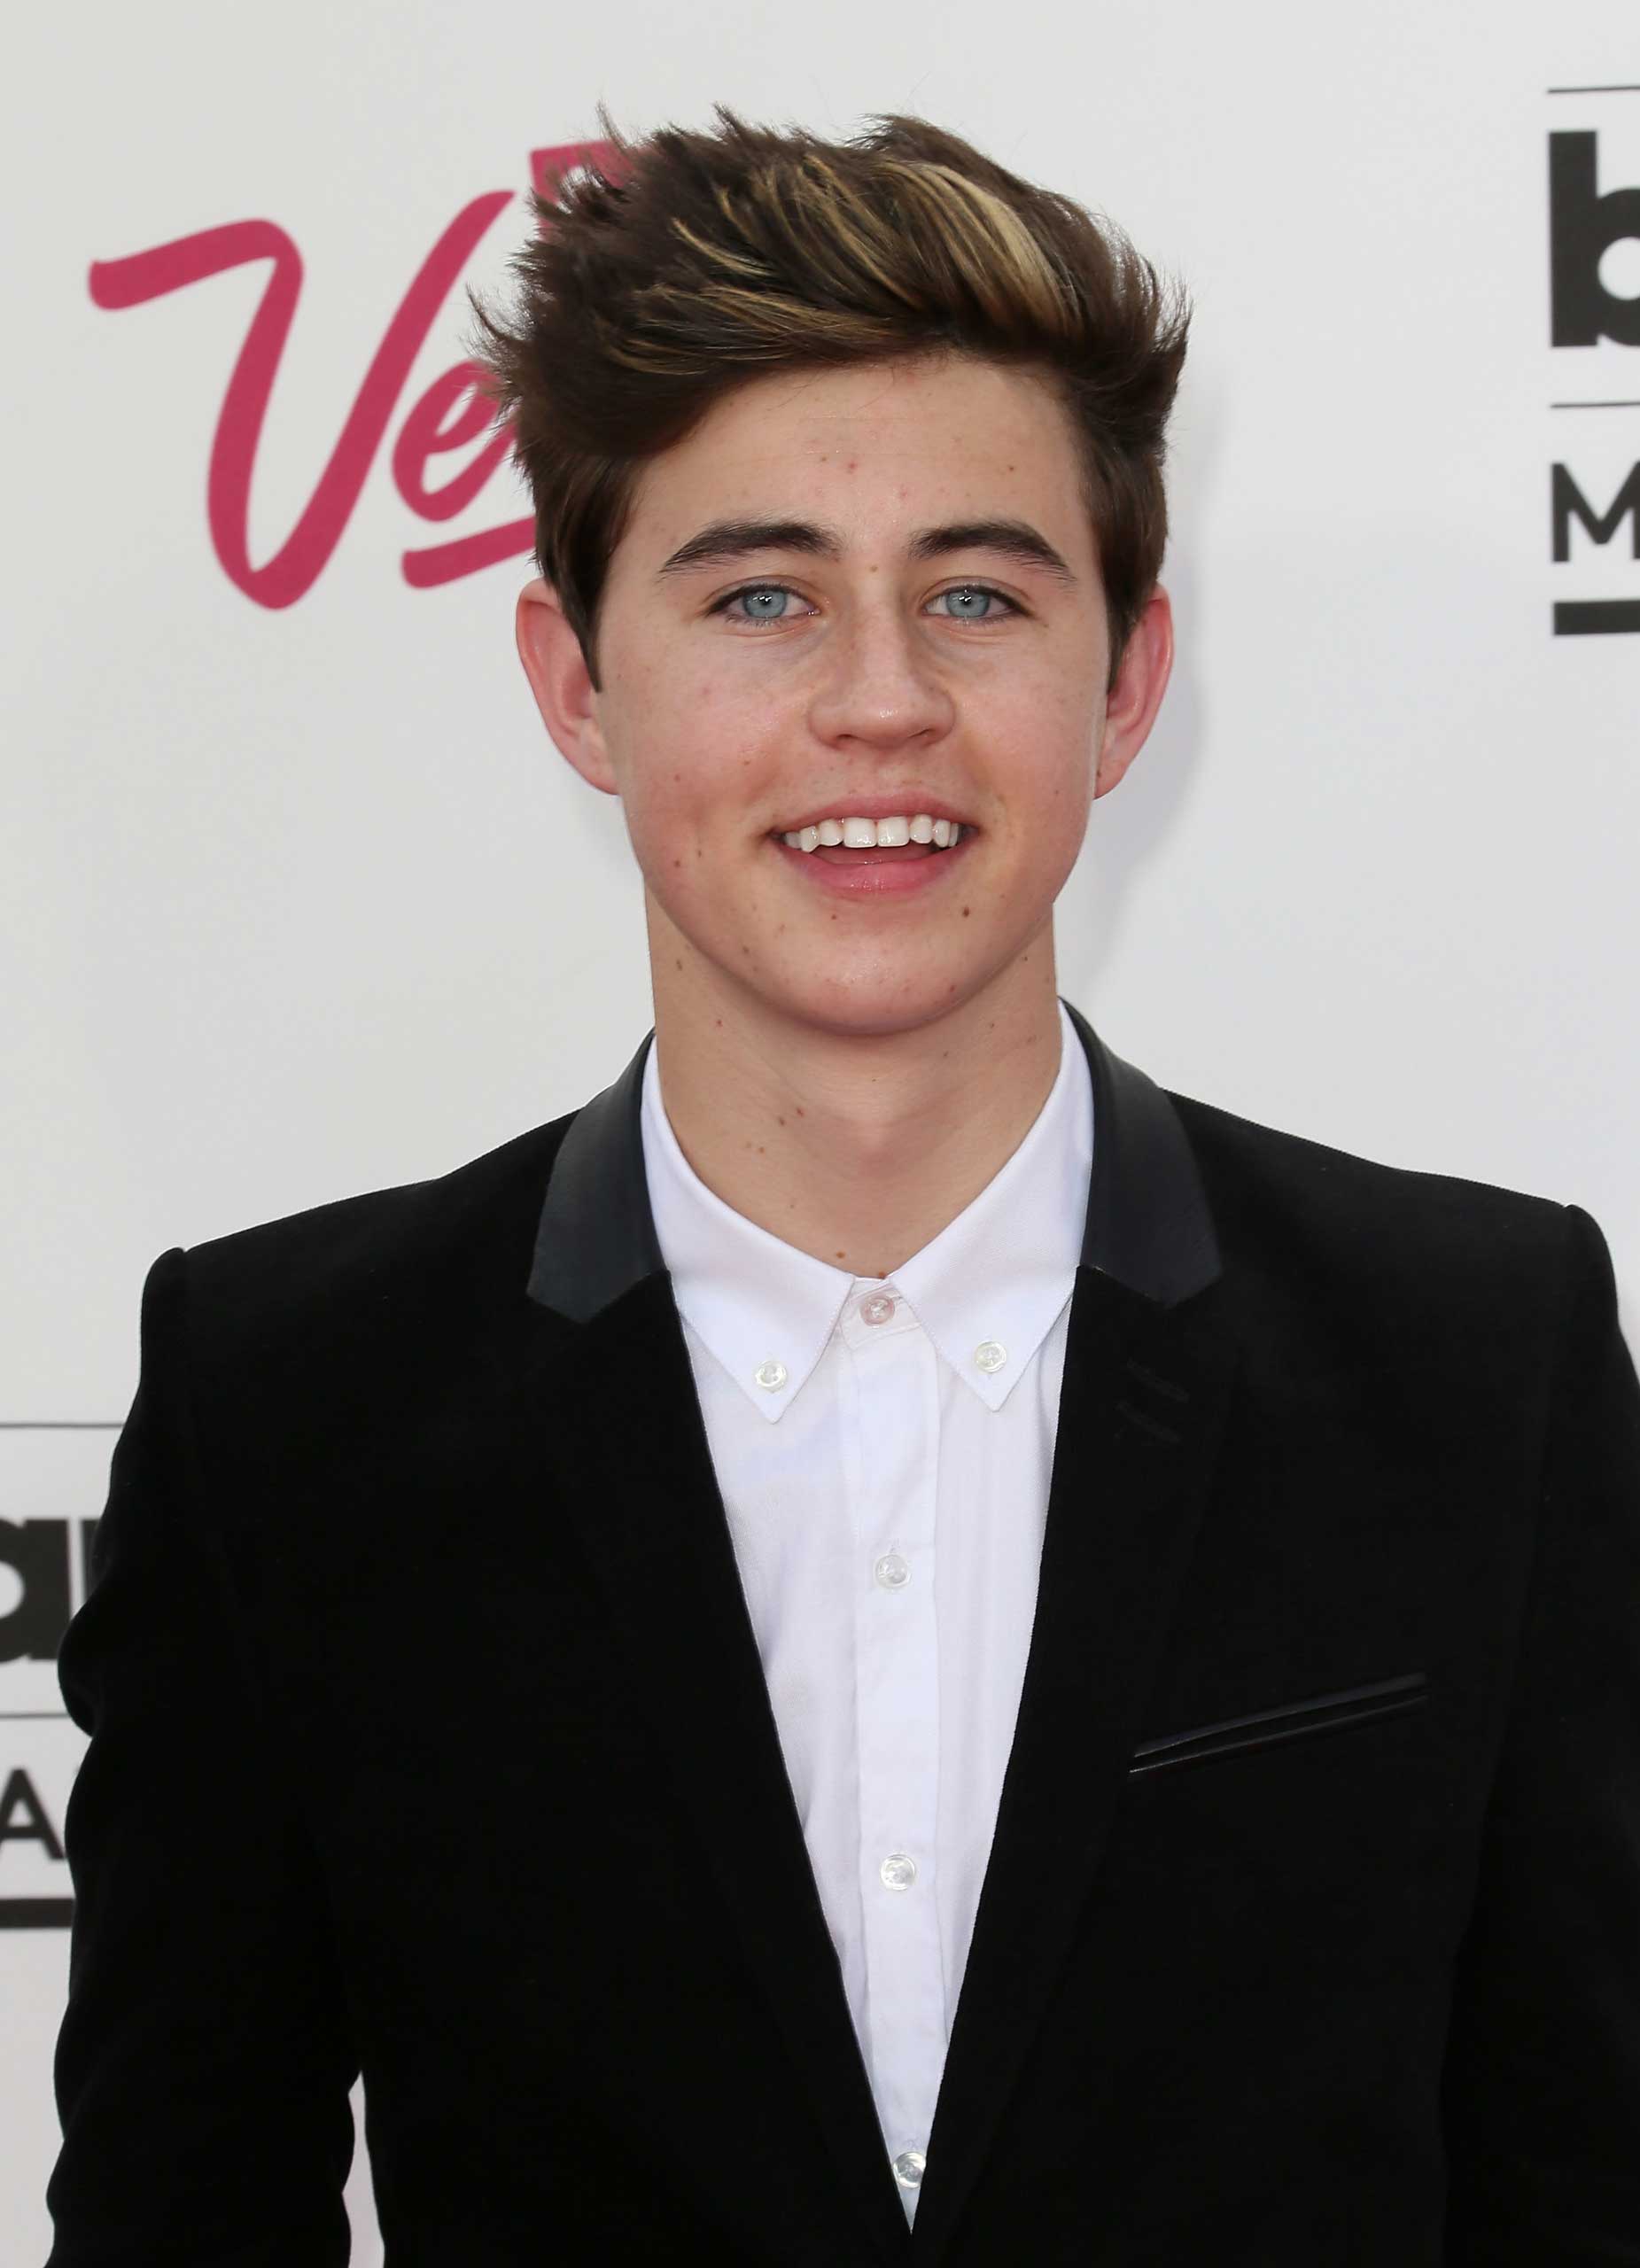 Vine star Nash Grier attends the 2014 Billboard Music Awards at the MGM Grand Garden Arena on May 18, 2014 in Las Vegas, Nevada. (Photo by David Livingston/Getty Images)